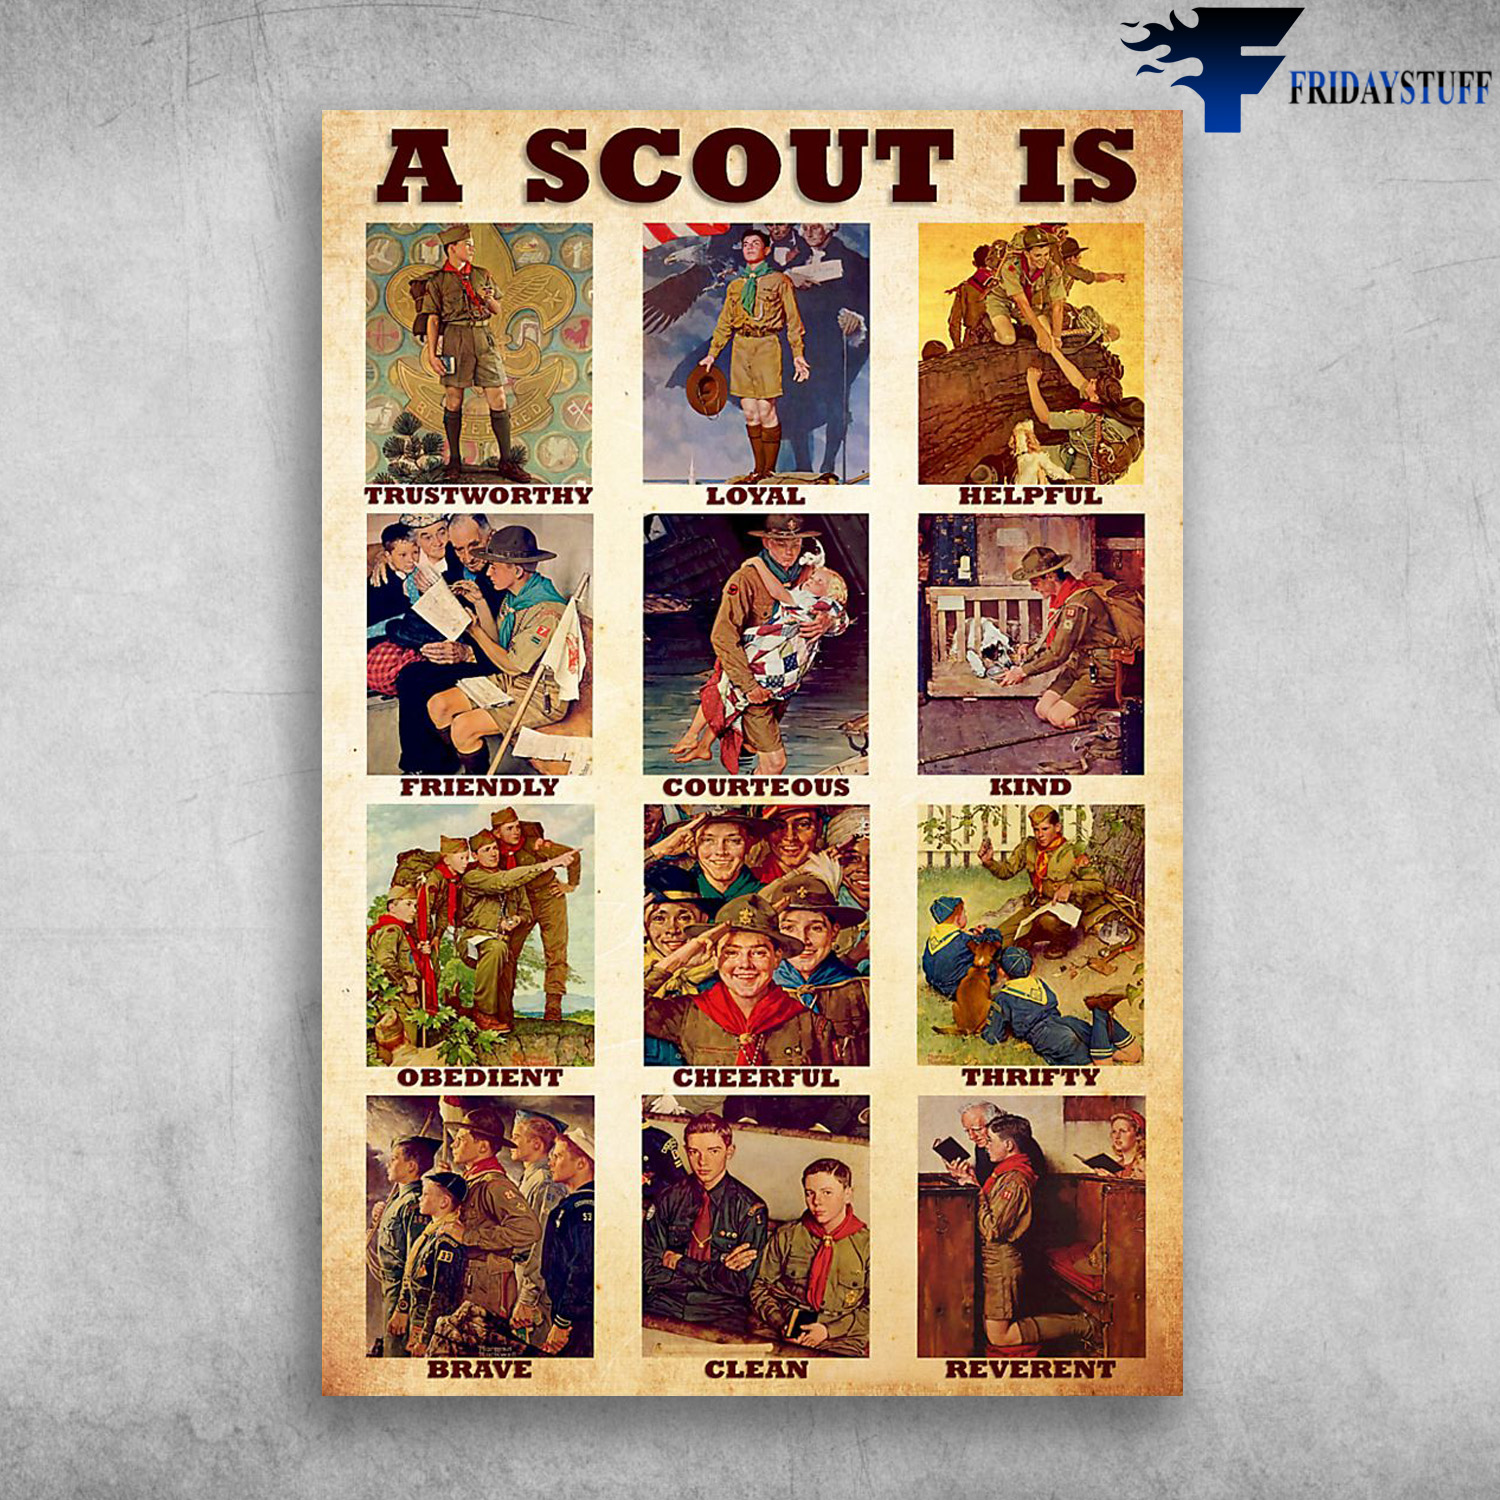 The Scout - A Sout Is Trustworthy, Loyal, Helpful, Friendy, Courteous, Kind, Obedient, Cheerful, Thrifty, Brave, Clean, Reverent